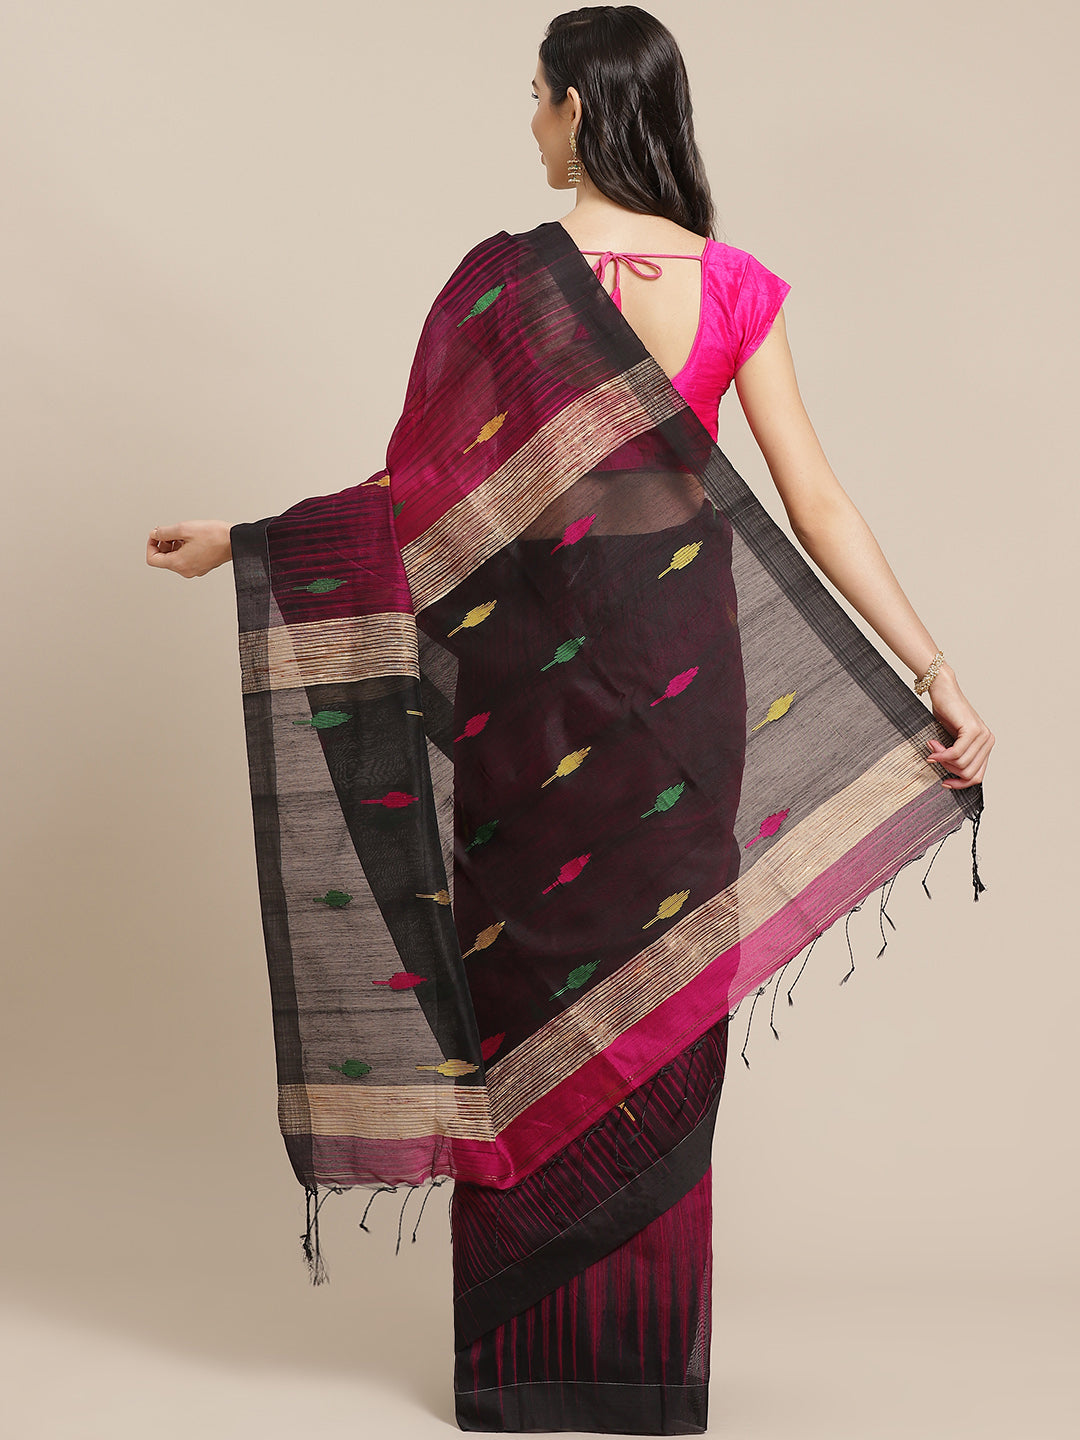 Purple and Blue, Kalakari India Ikat Silk Cotton Woven Design Saree with Blouse SHBESA0029-Saree-Kalakari India-SHBESA0029-Bengal, Cotton, Geographical Indication, Hand Crafted, Heritage Prints, Ikkat, Natural Dyes, Red, Sarees, Sustainable Fabrics, Woven, Yellow-[Linen,Ethnic,wear,Fashionista,Handloom,Handicraft,Indigo,blockprint,block,print,Cotton,Chanderi,Blue, latest,classy,party,bollywood,trendy,summer,style,traditional,formal,elegant,unique,style,hand,block,print, dabu,booti,gift,present,g